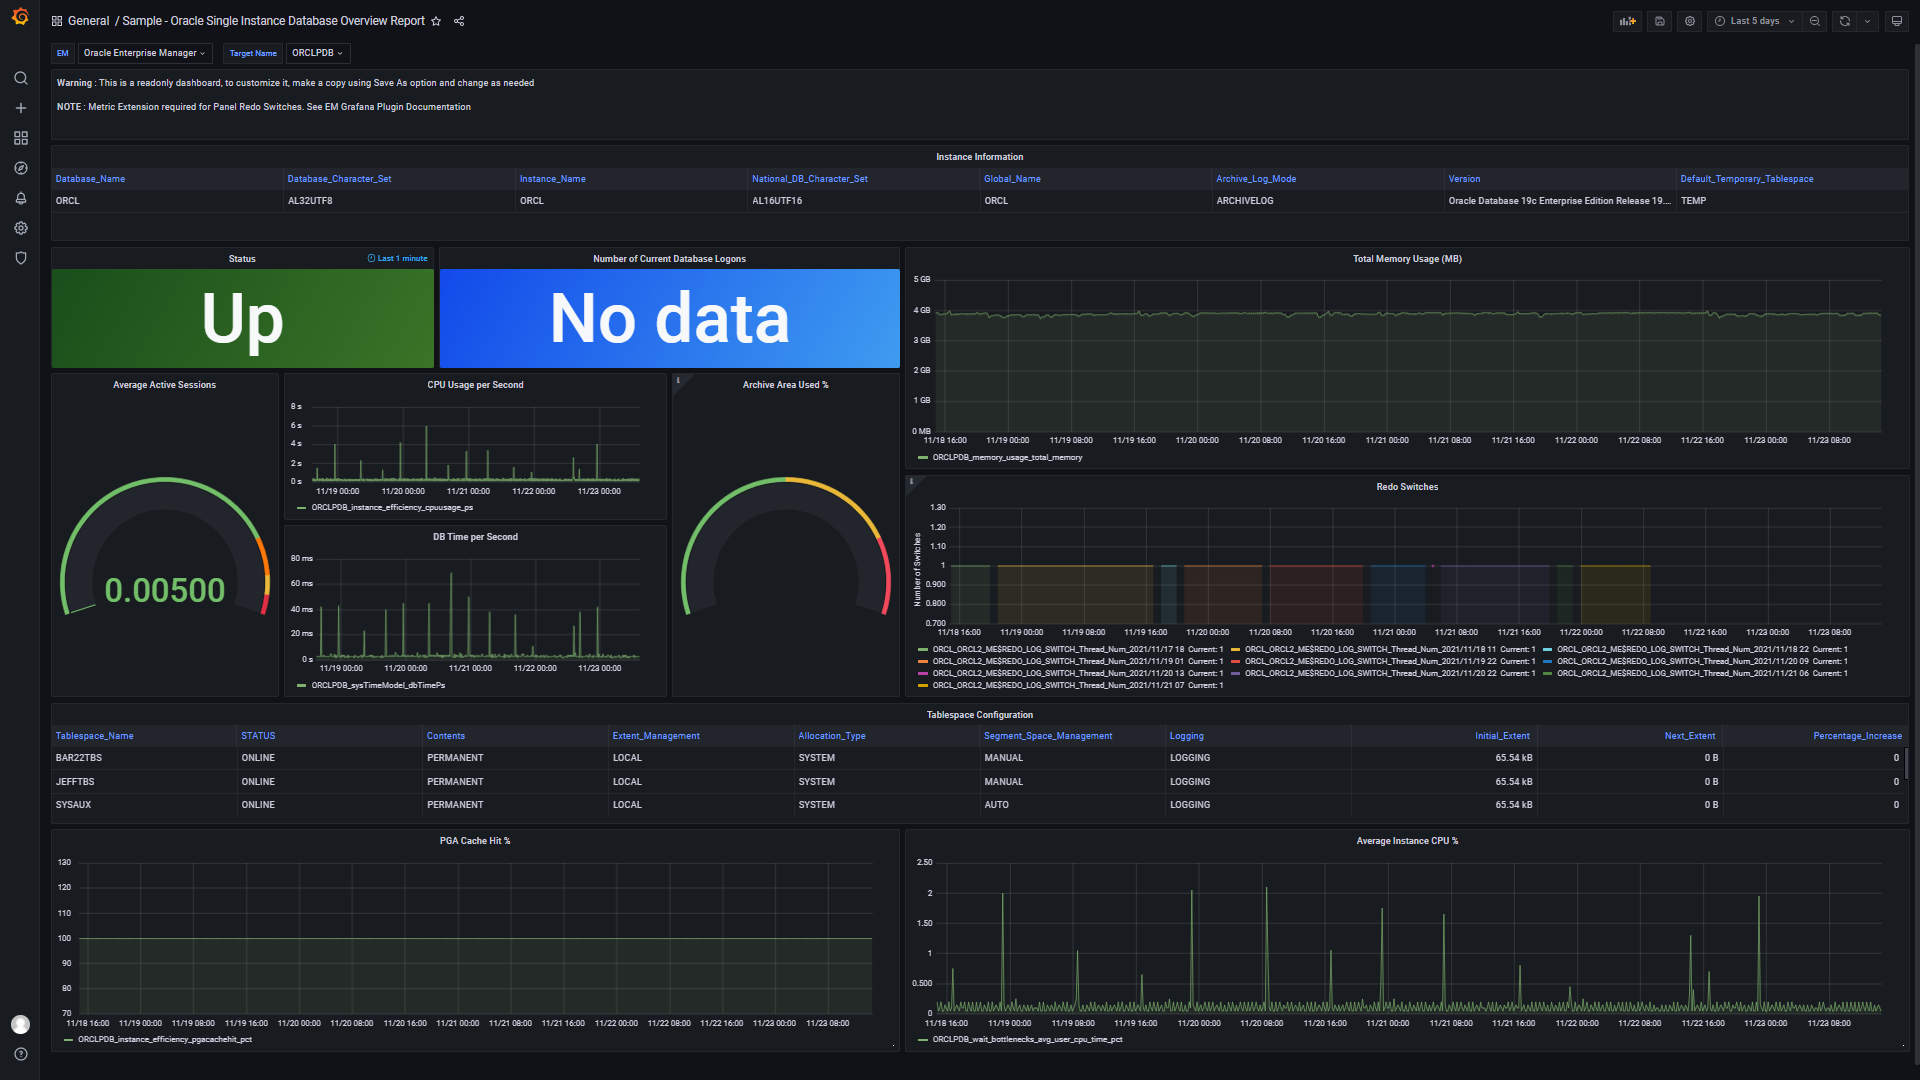 This dashboard provides a single pane look at the status and health of a single instance database.